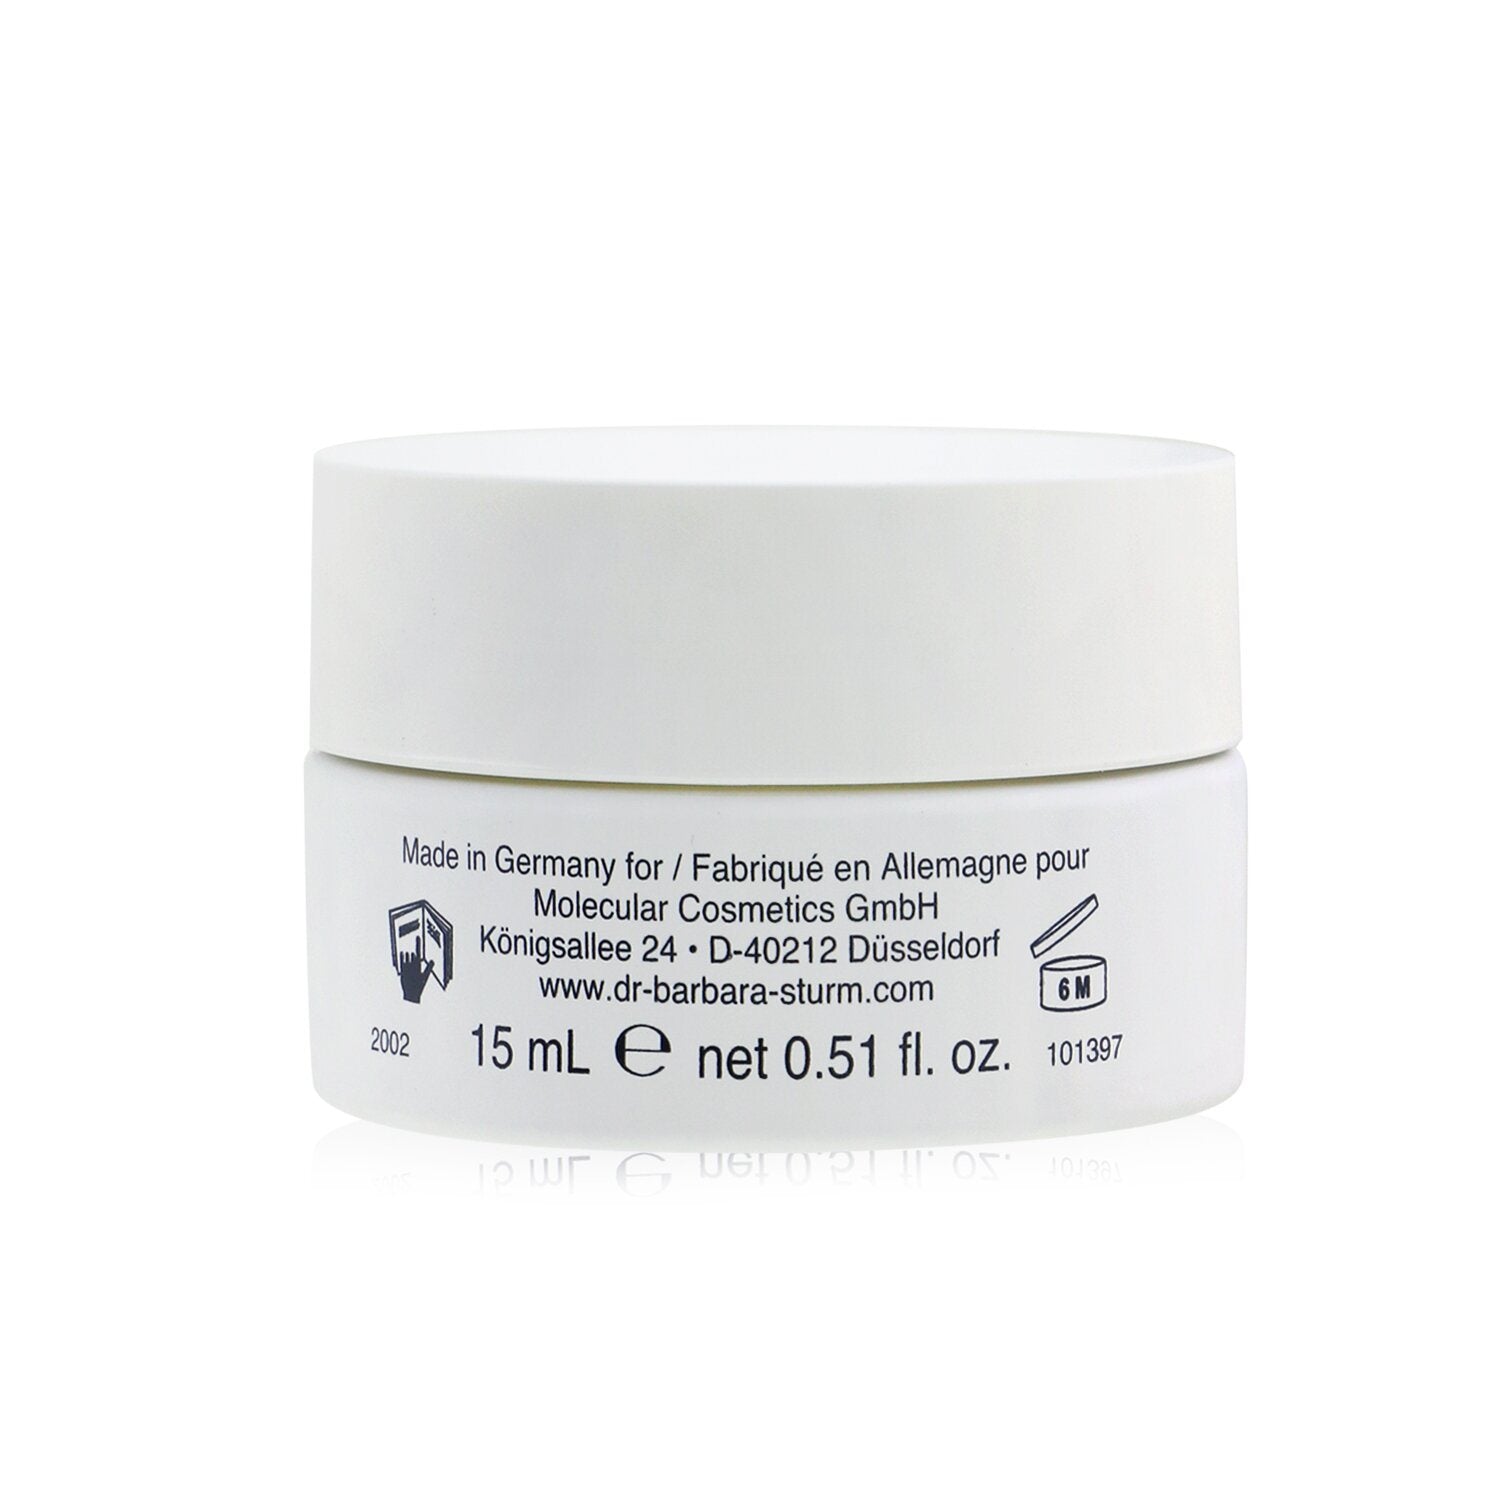 Eye Cream is a highly effective and hydrating solution for combating dark shadows around the eyes.